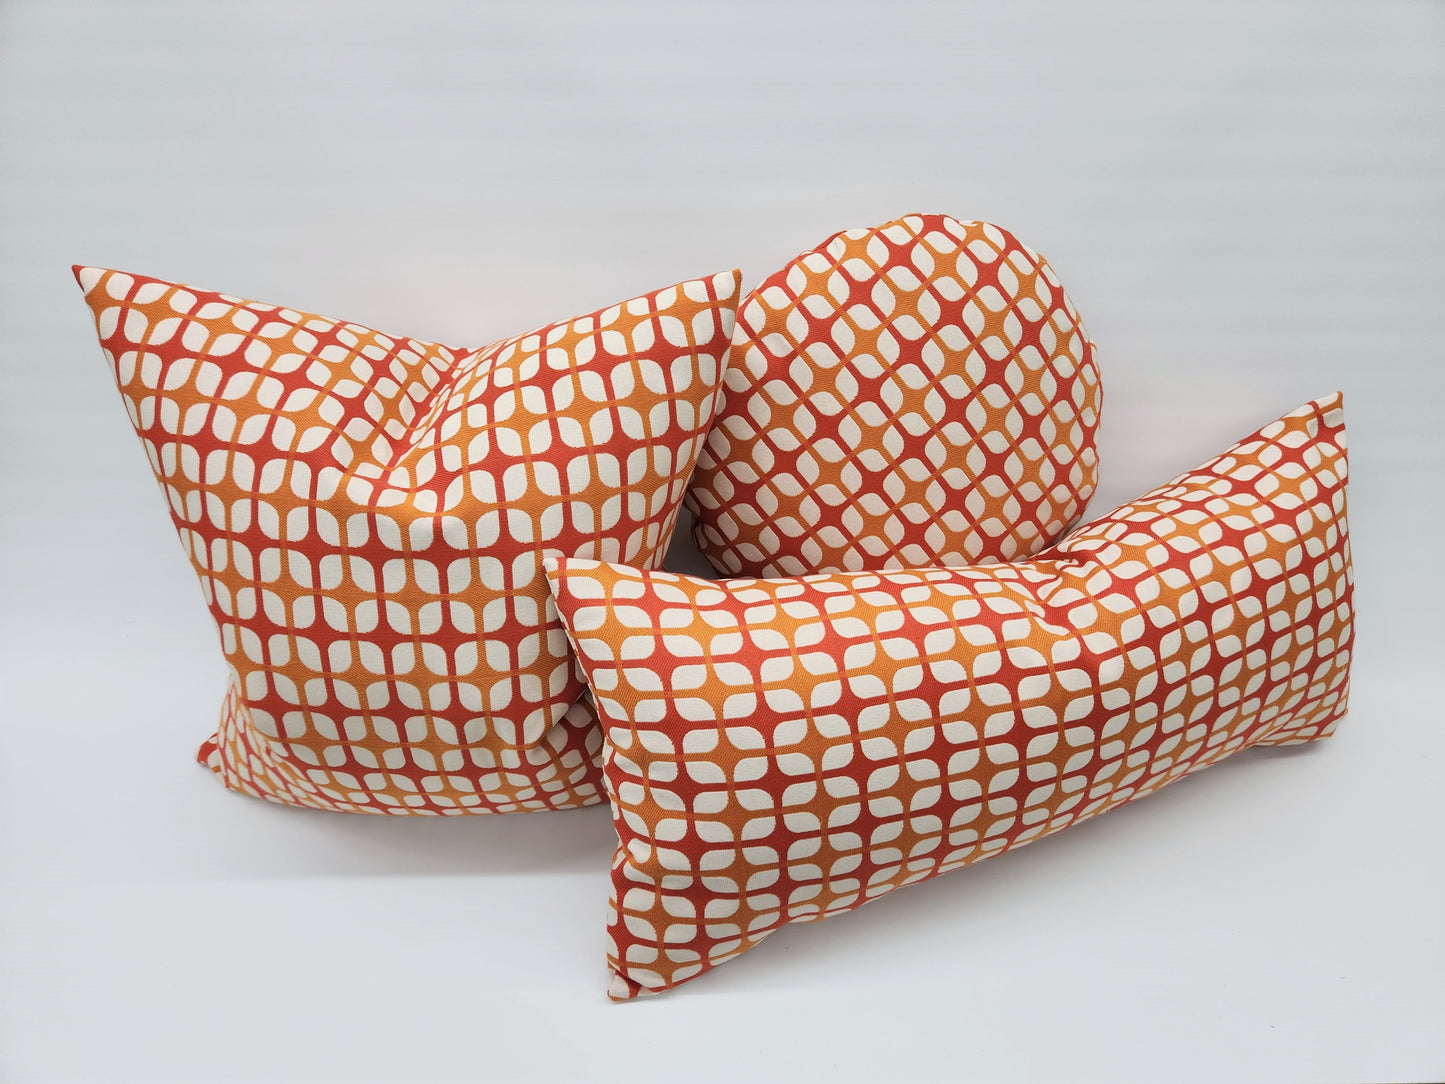 Breeze Block Vintage Inspired Lumbar Pillow Cover, Tangerine, Various Sizes, with or without Inserts